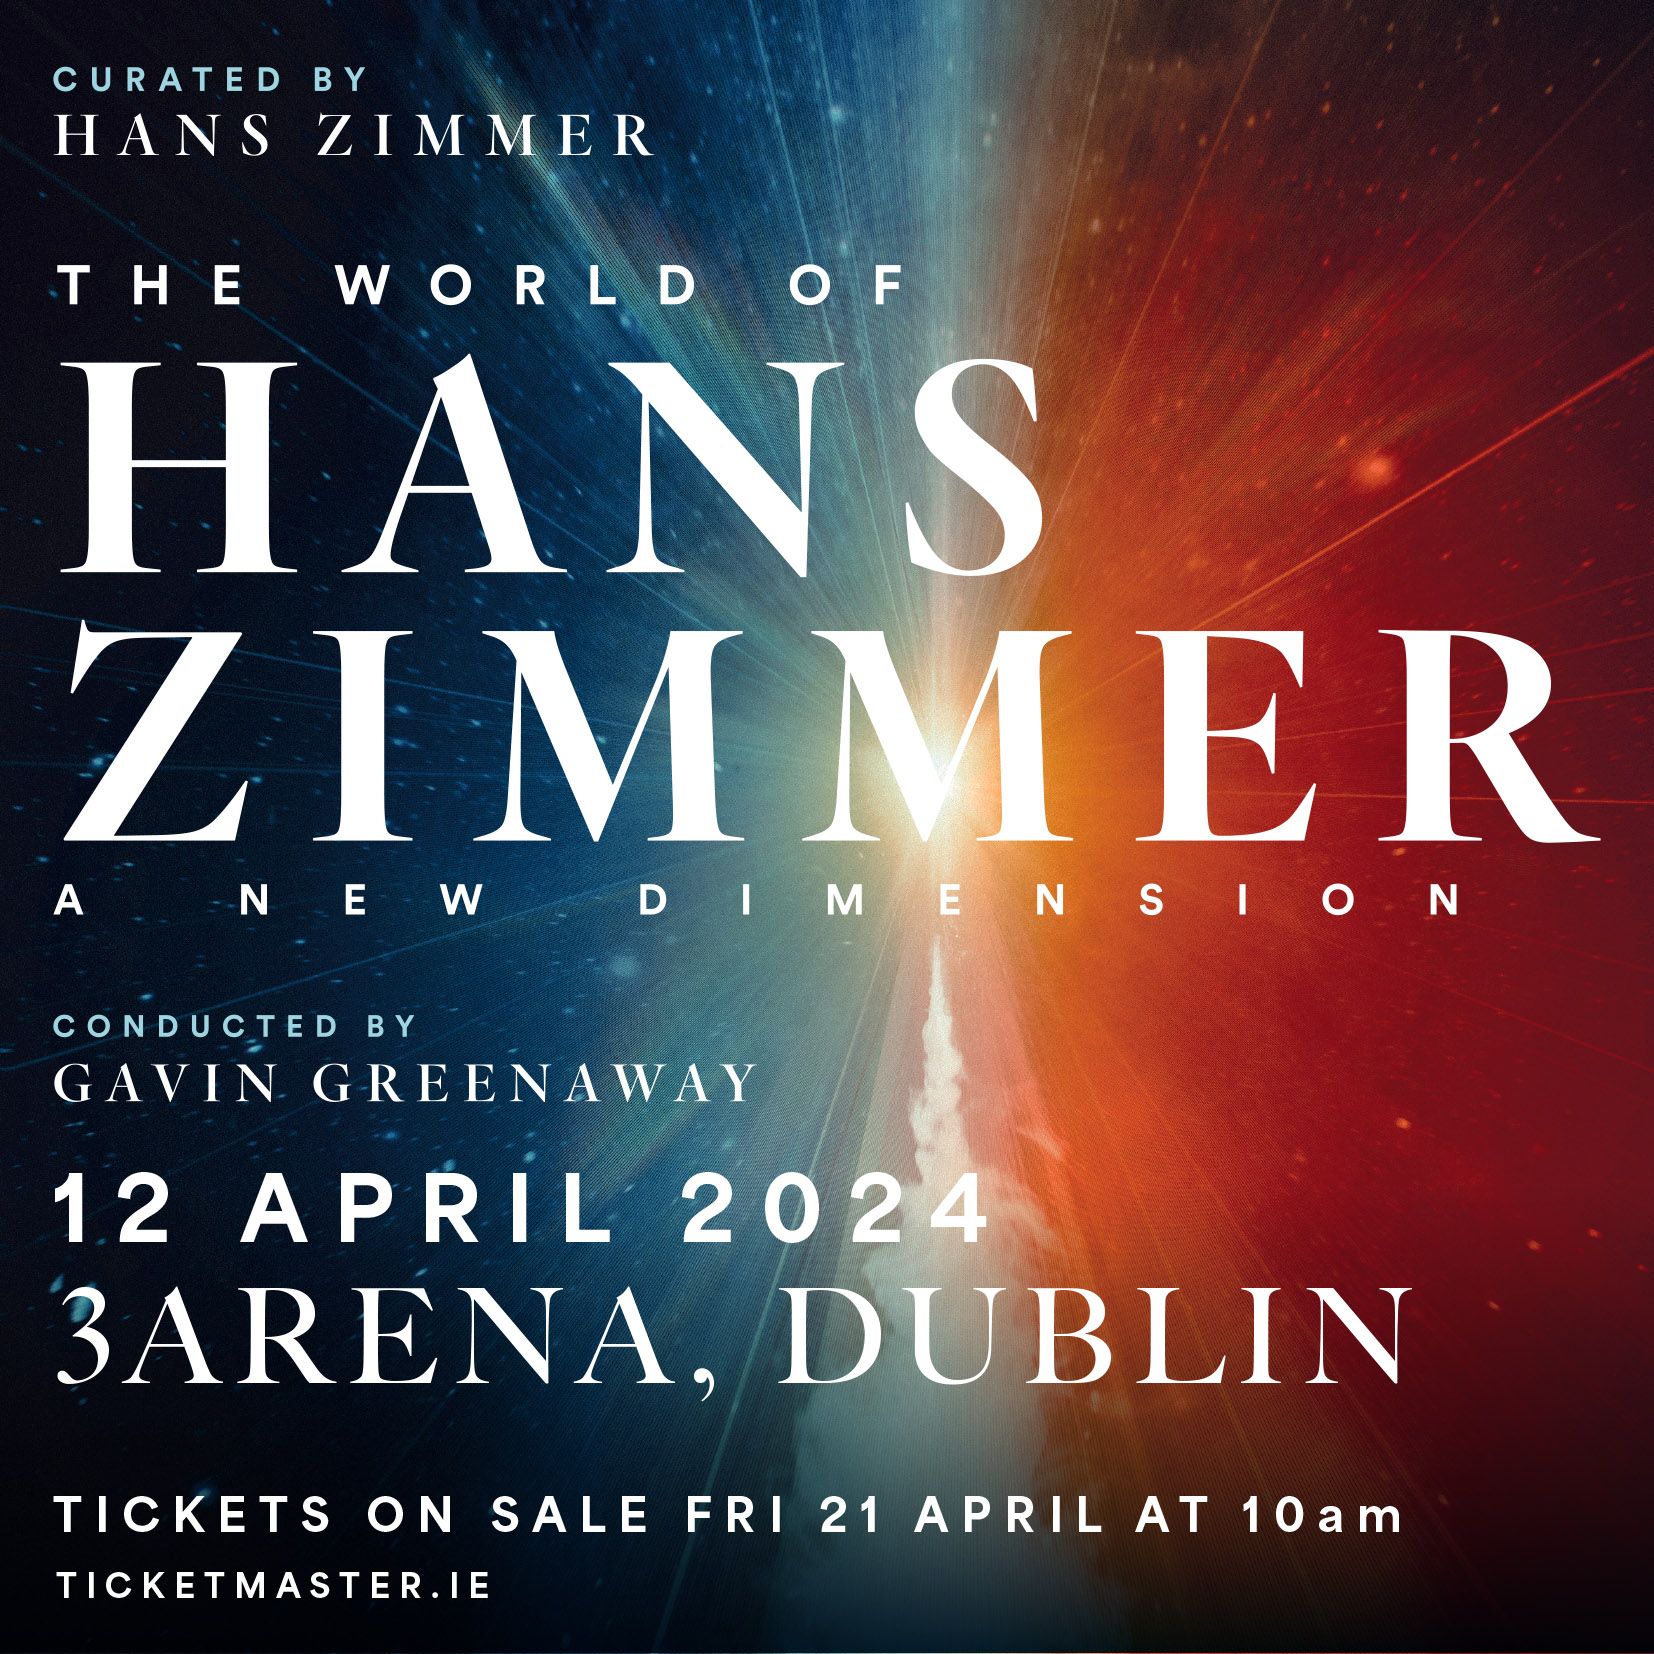 European Tour 2024 The World of Hans Zimmer  A New Dimension  The World of Hans Zimmer - A New Dimension comes to 3Arena Dublin on Friday 12th April 2024.